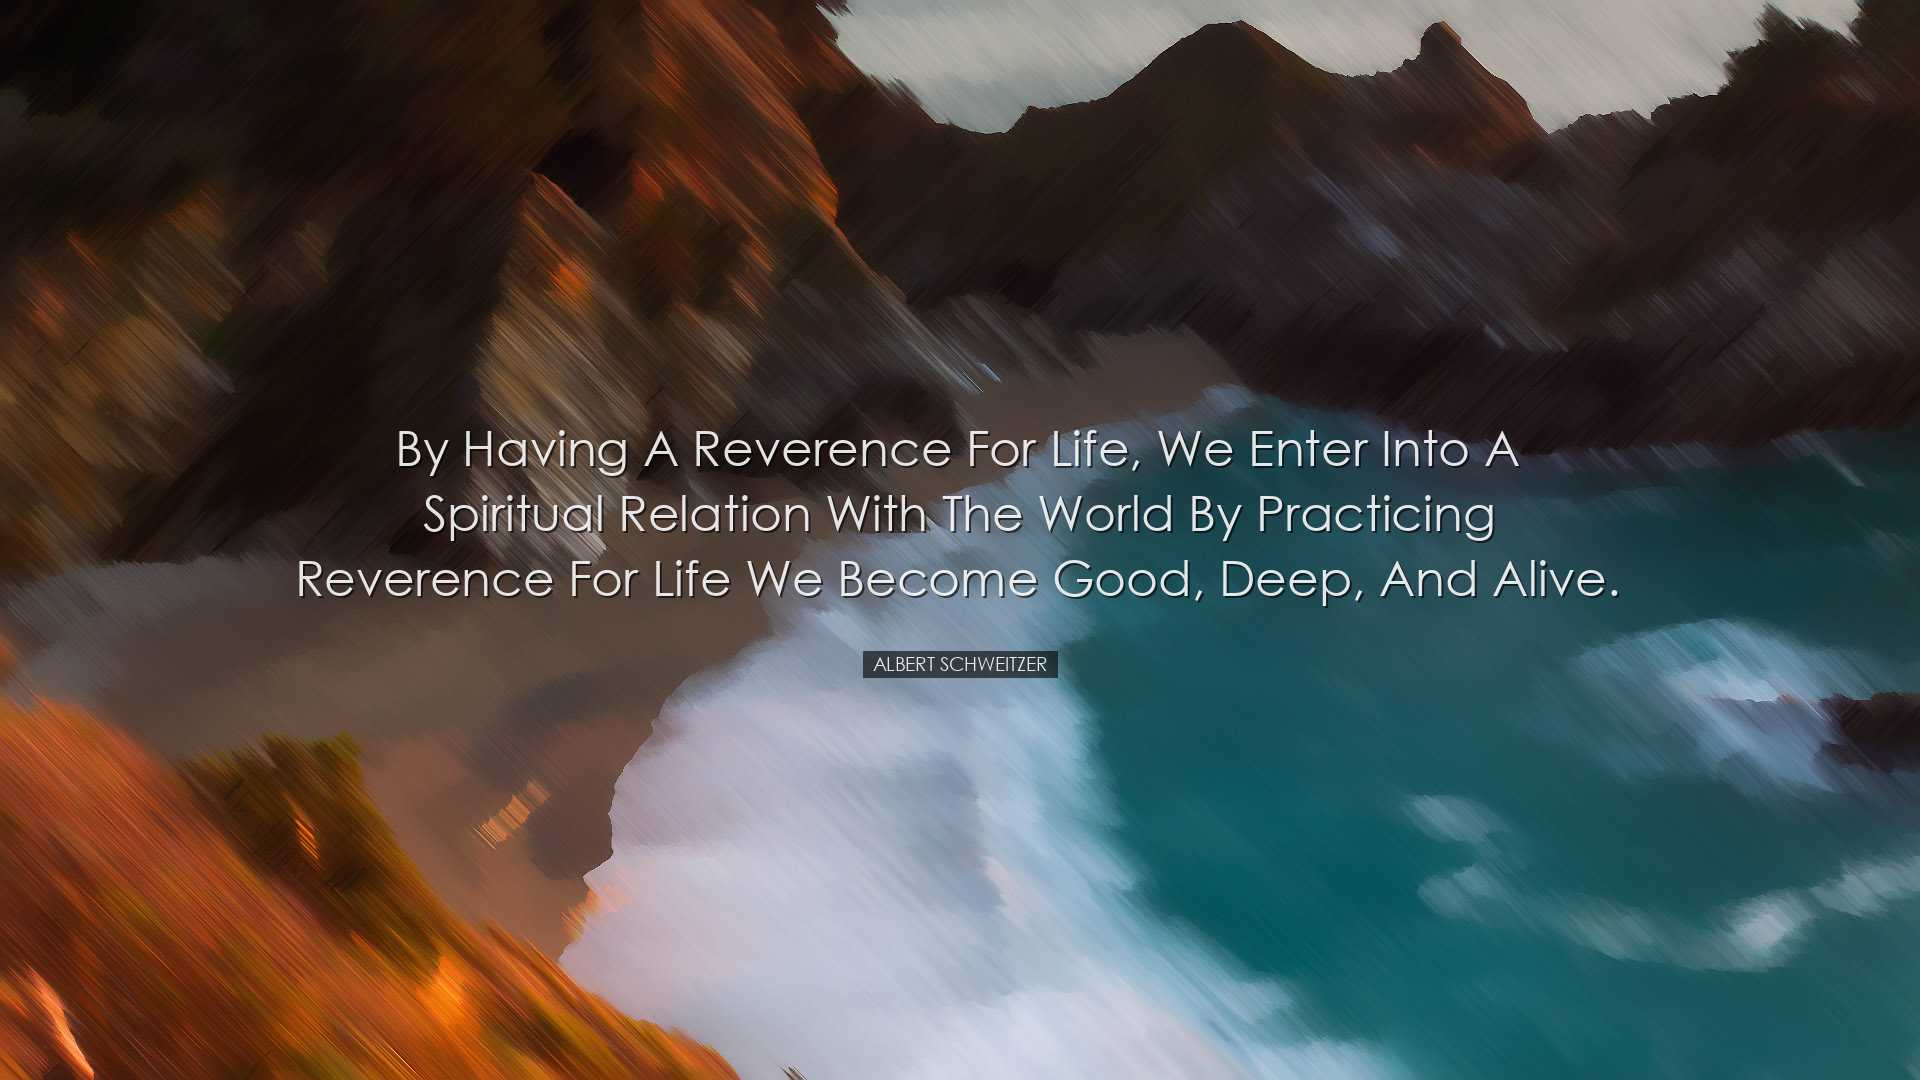 By having a reverence for life, we enter into a spiritual relation